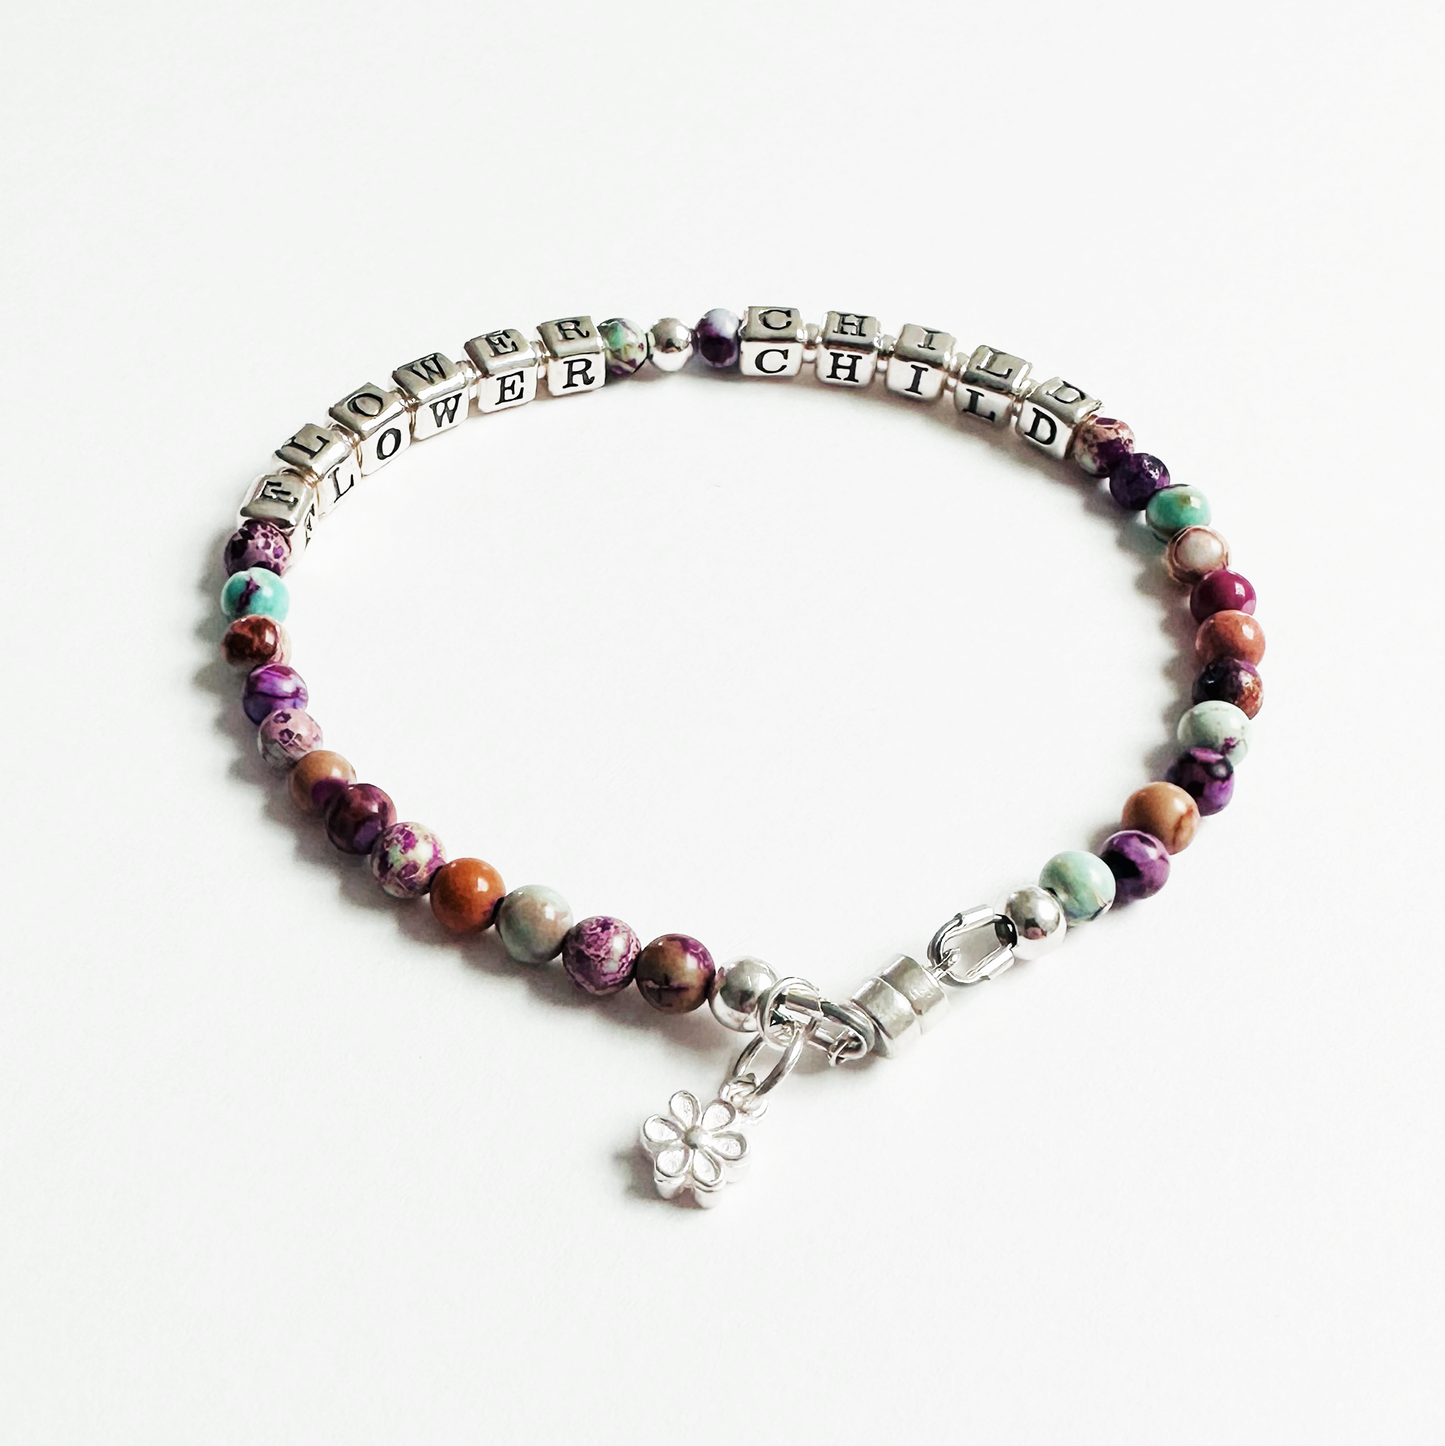 Boho Flower Child Bracelet in sterling silver and rainbow colored beads